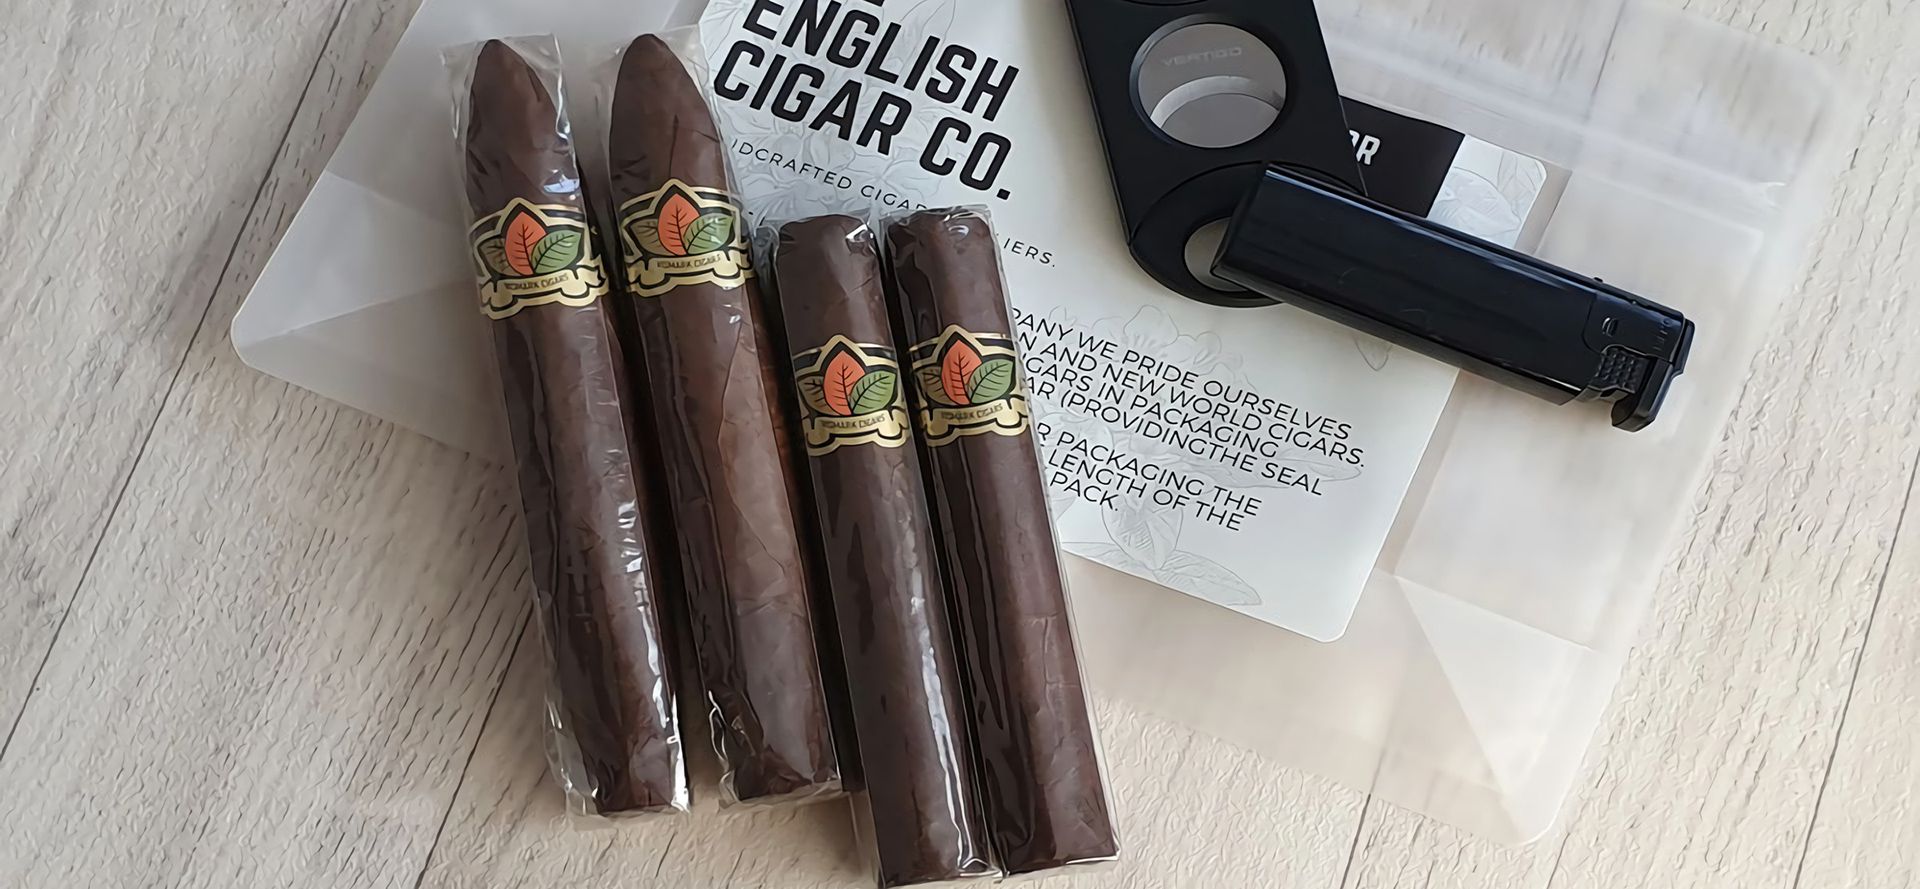 Full-Bodied Cigars.